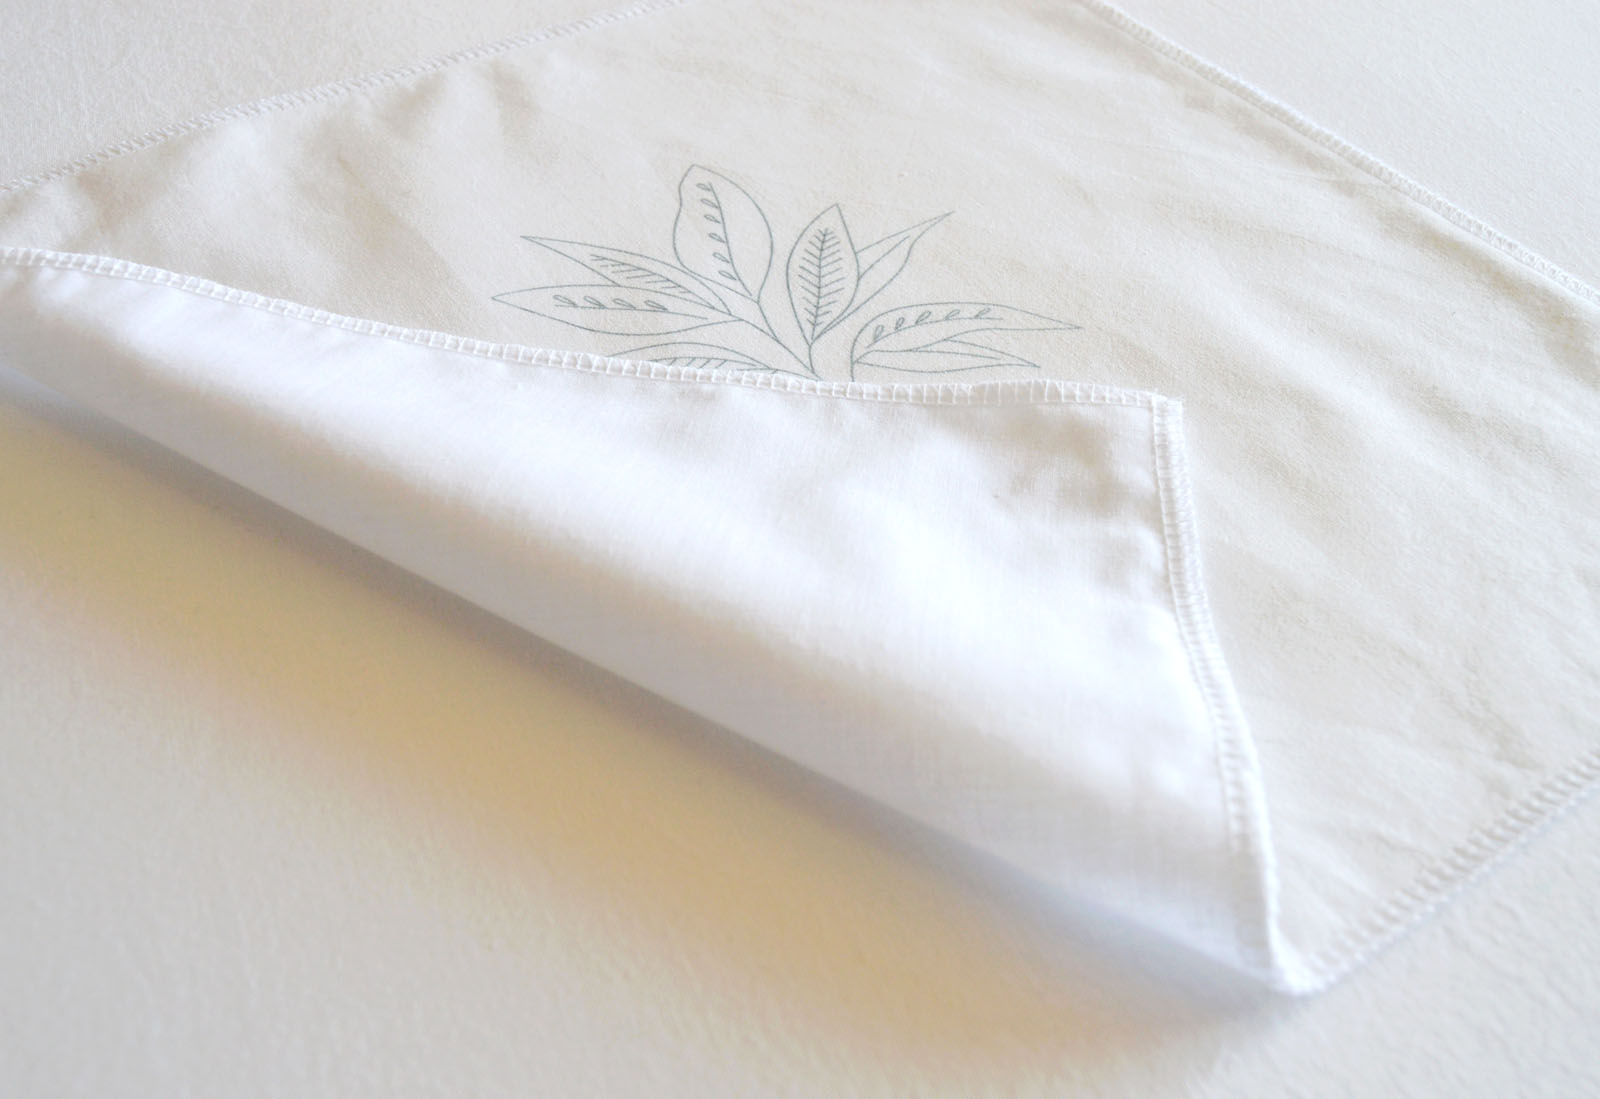 How to Choose a Ground Fabric for Hand Embroidery –